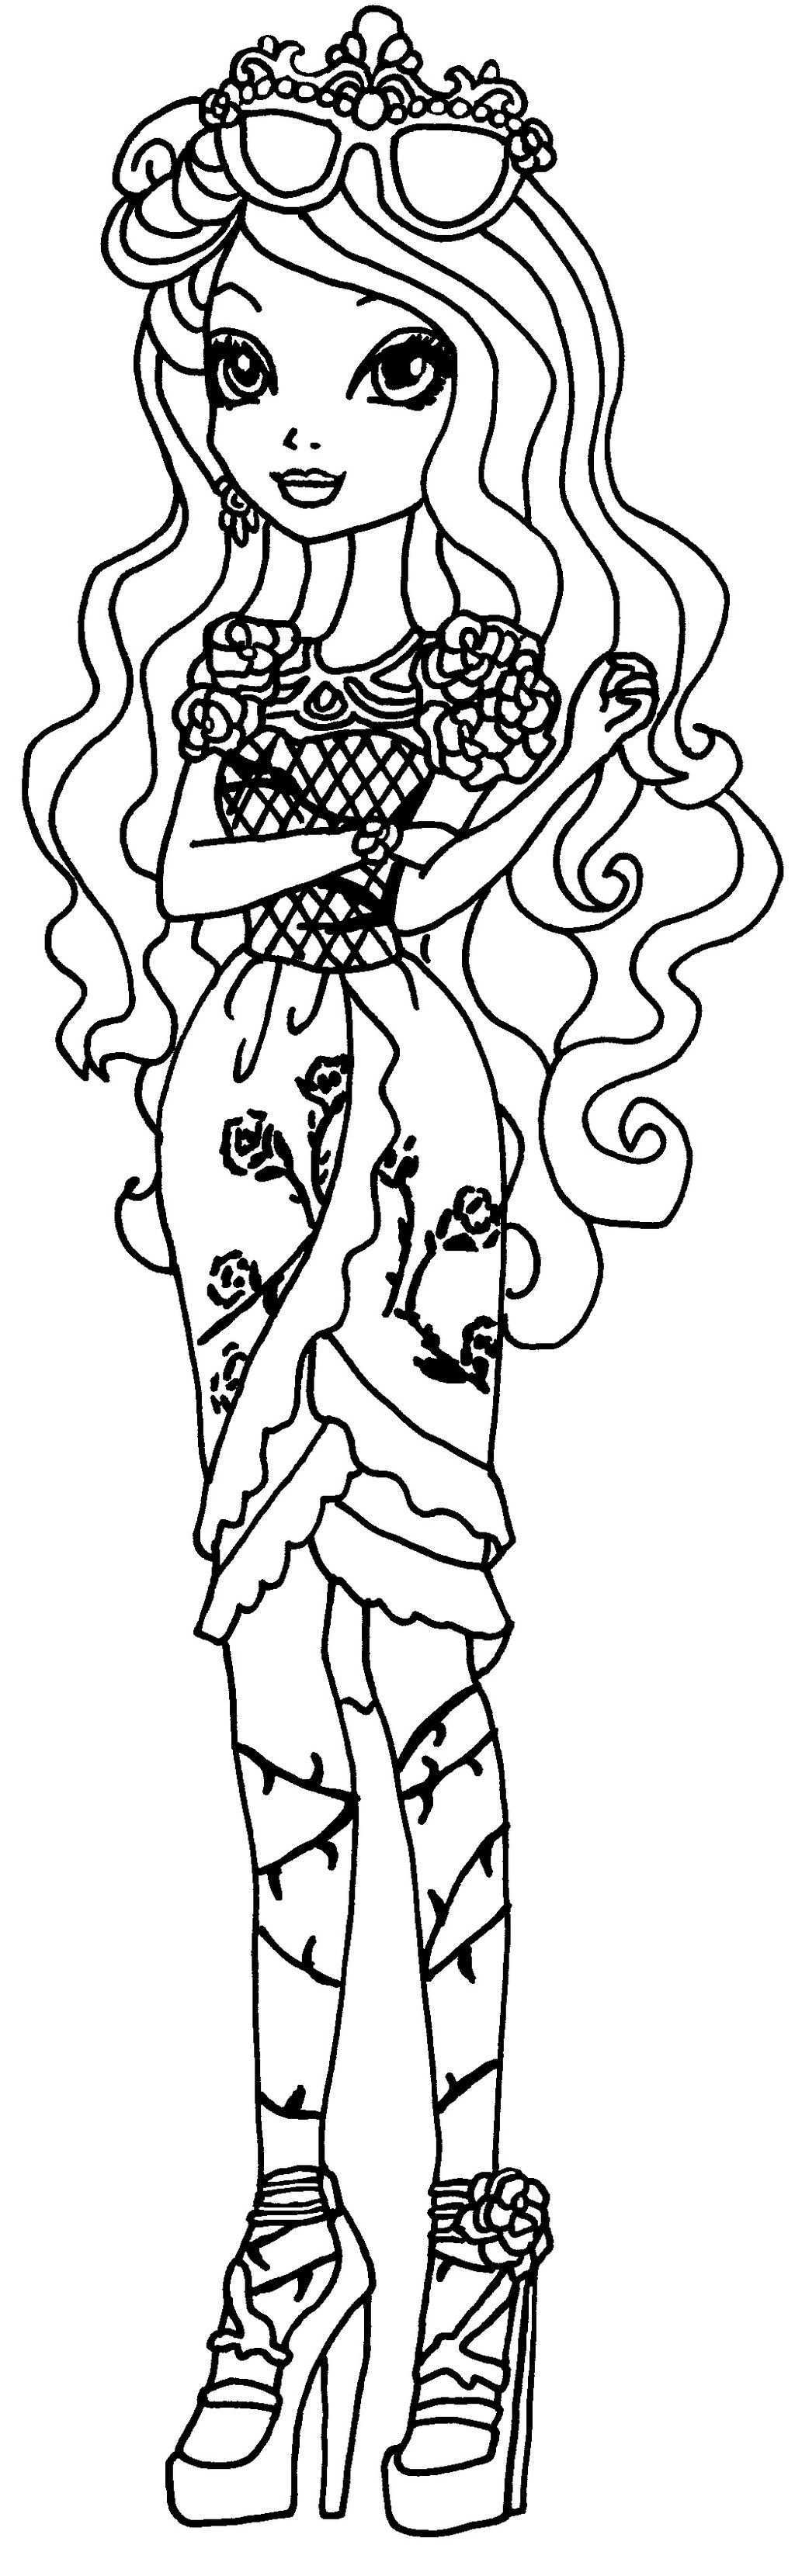 Ever After High Coloring Pages Coloring Pages For Girls Colouring Pages